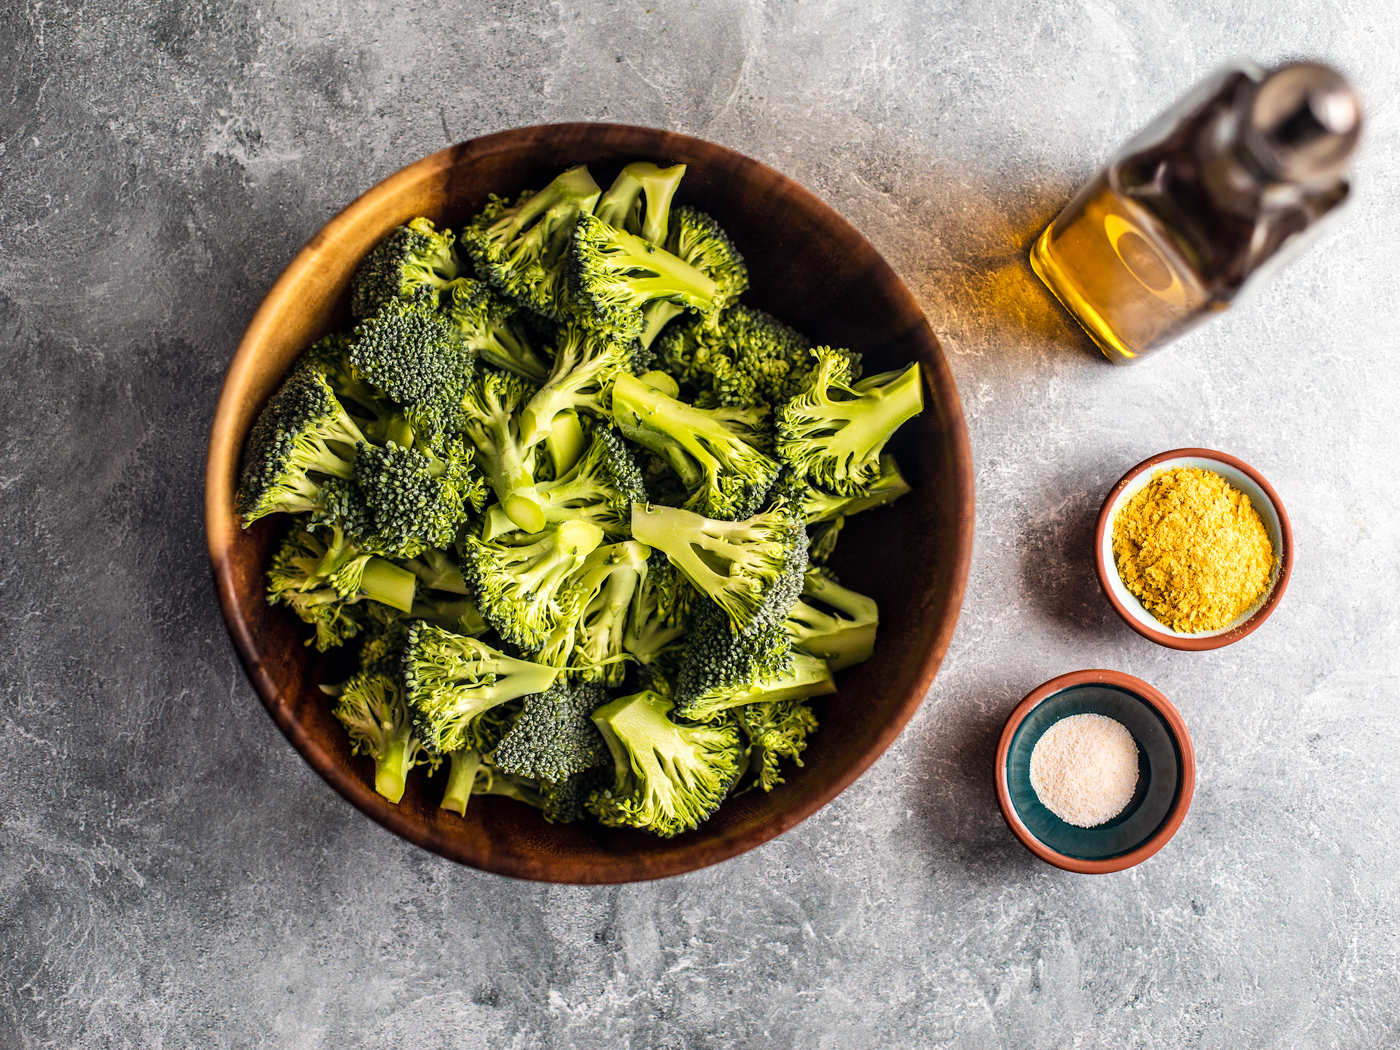 Bamboo bowl full of broccoli florets next to pinch bowls of garlic salt, nutritional yeast, and a bottle of olive oil.